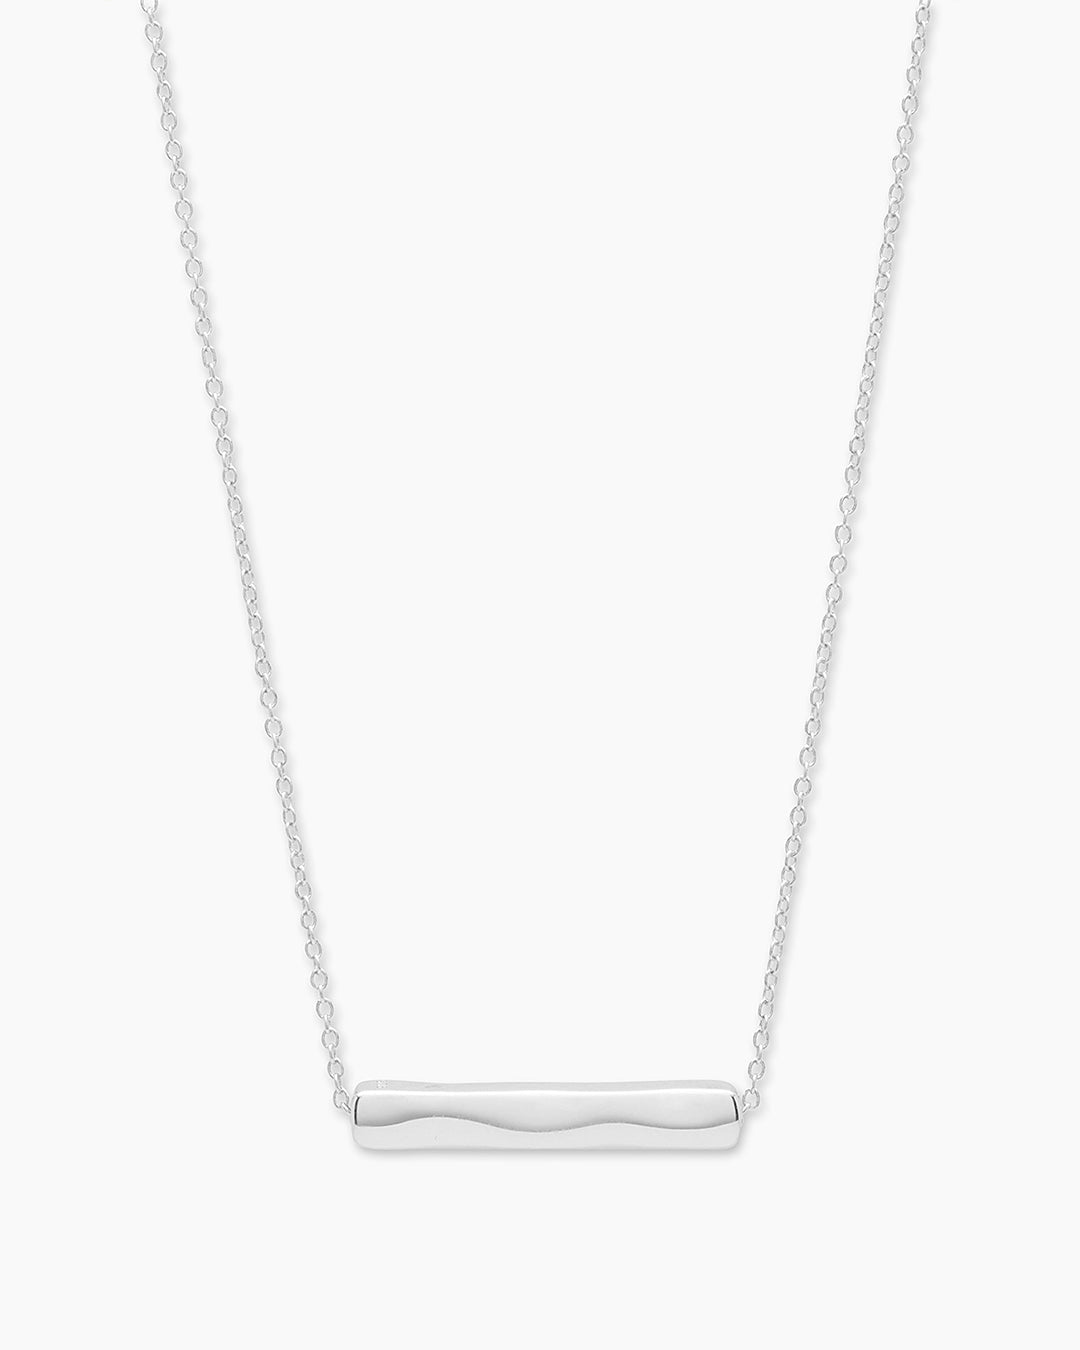 3D Silver Vertical Bar Cuboid Stick Stainless Steel Locket Necklace Chain  Pendant with Silver Adjustable Ring